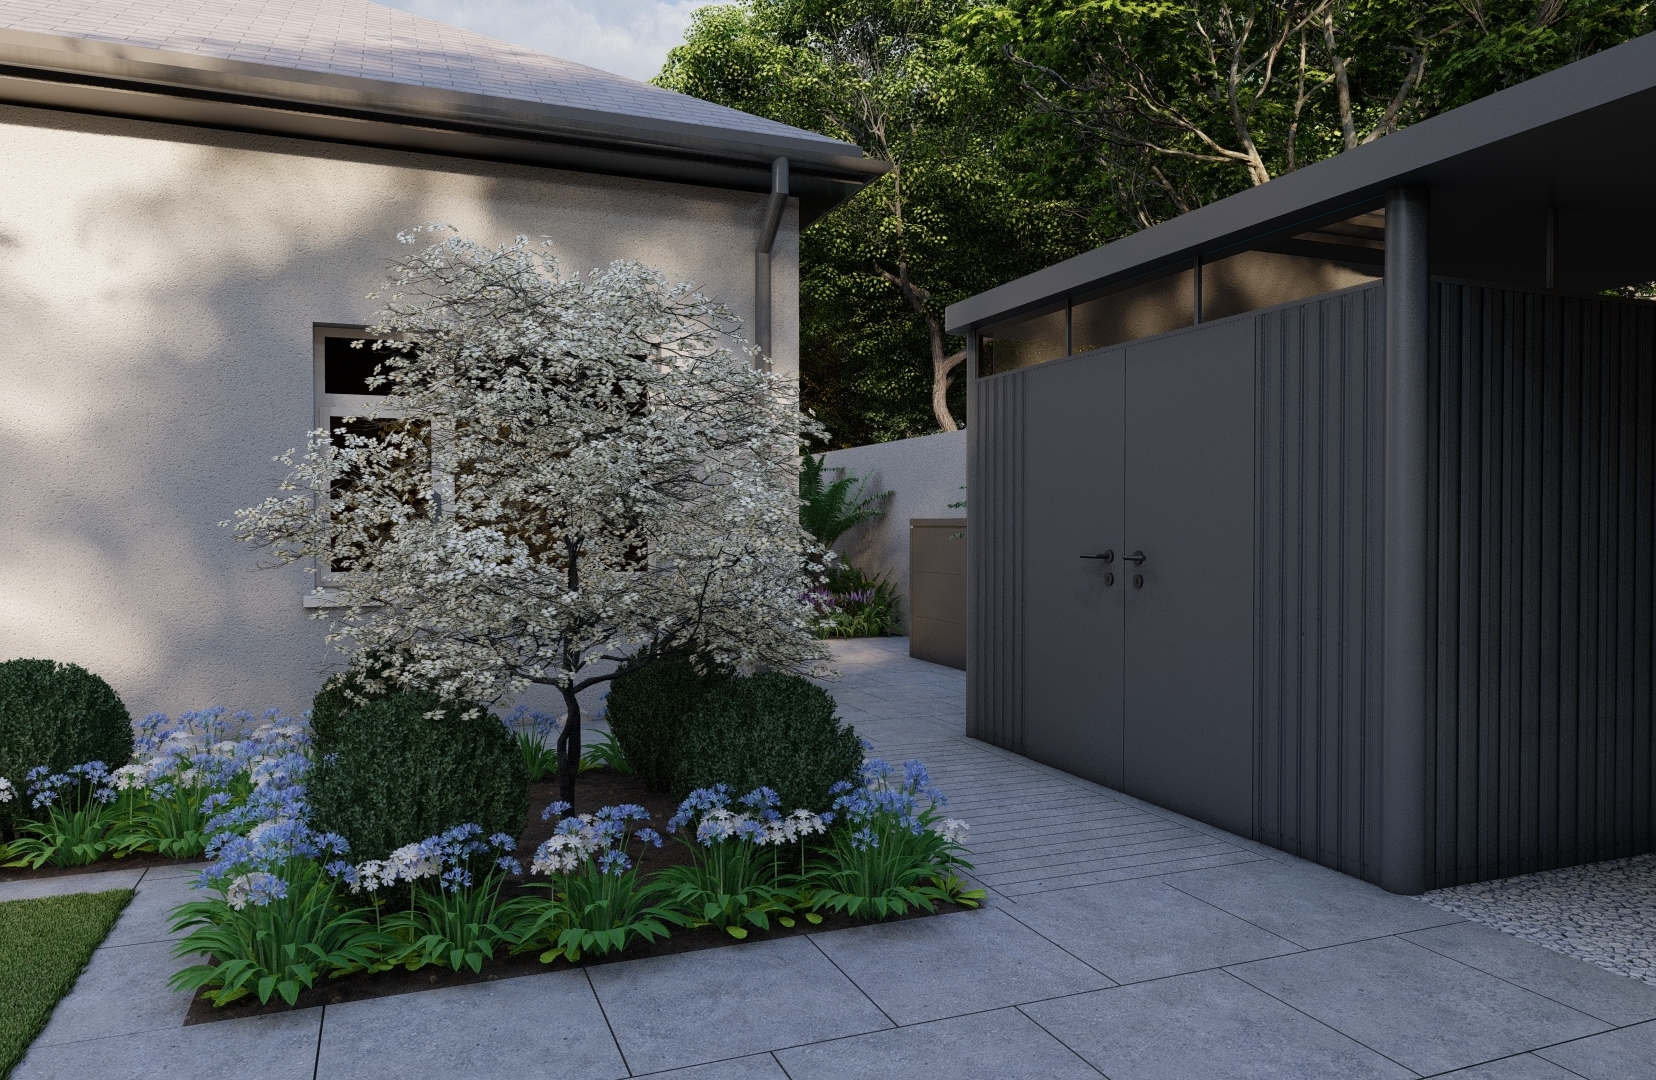 Design Visuals for a Family Garden in Clontarf, Dublin 3 featuring bespoke horizontal timber screening, natural grass lawn, limestone paving, Biohort Garden Shed and mixed low maintenance  planting.